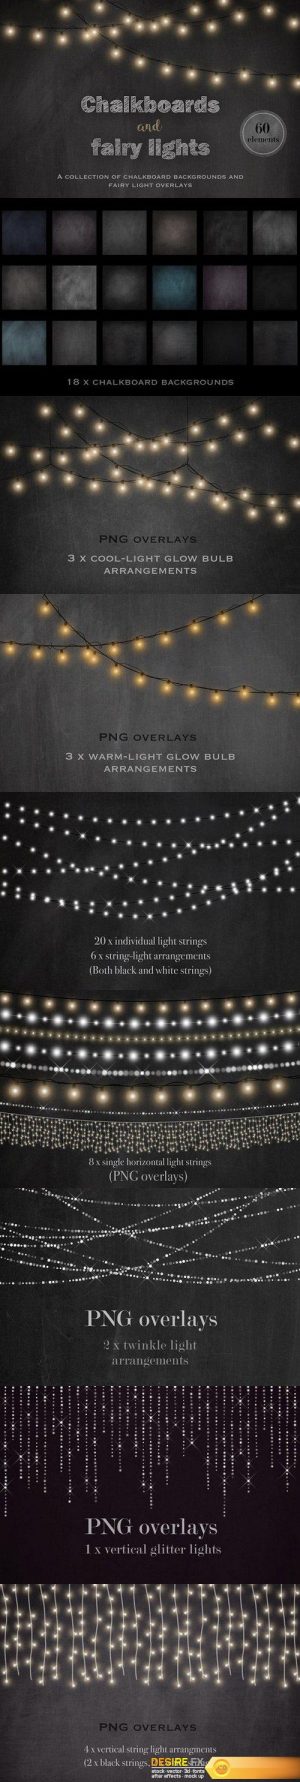 CM – Chalkboards and fairy lights 1482204